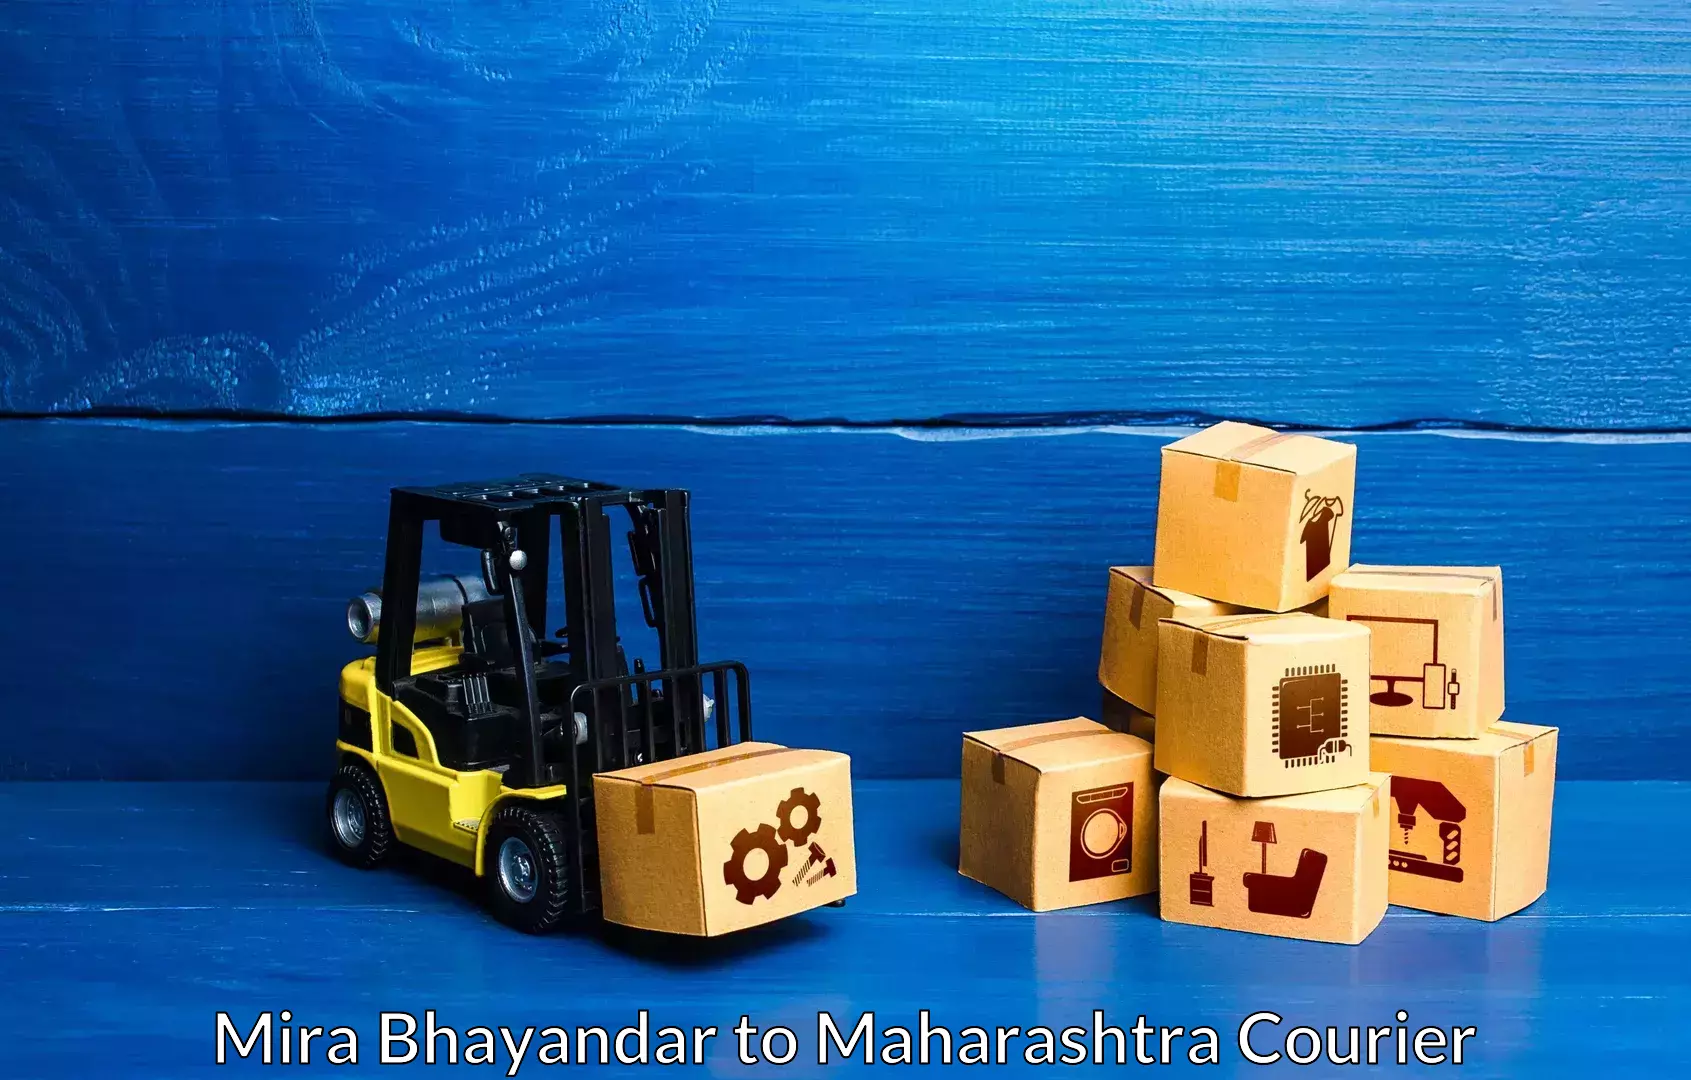 Furniture delivery service Mira Bhayandar to Mahim